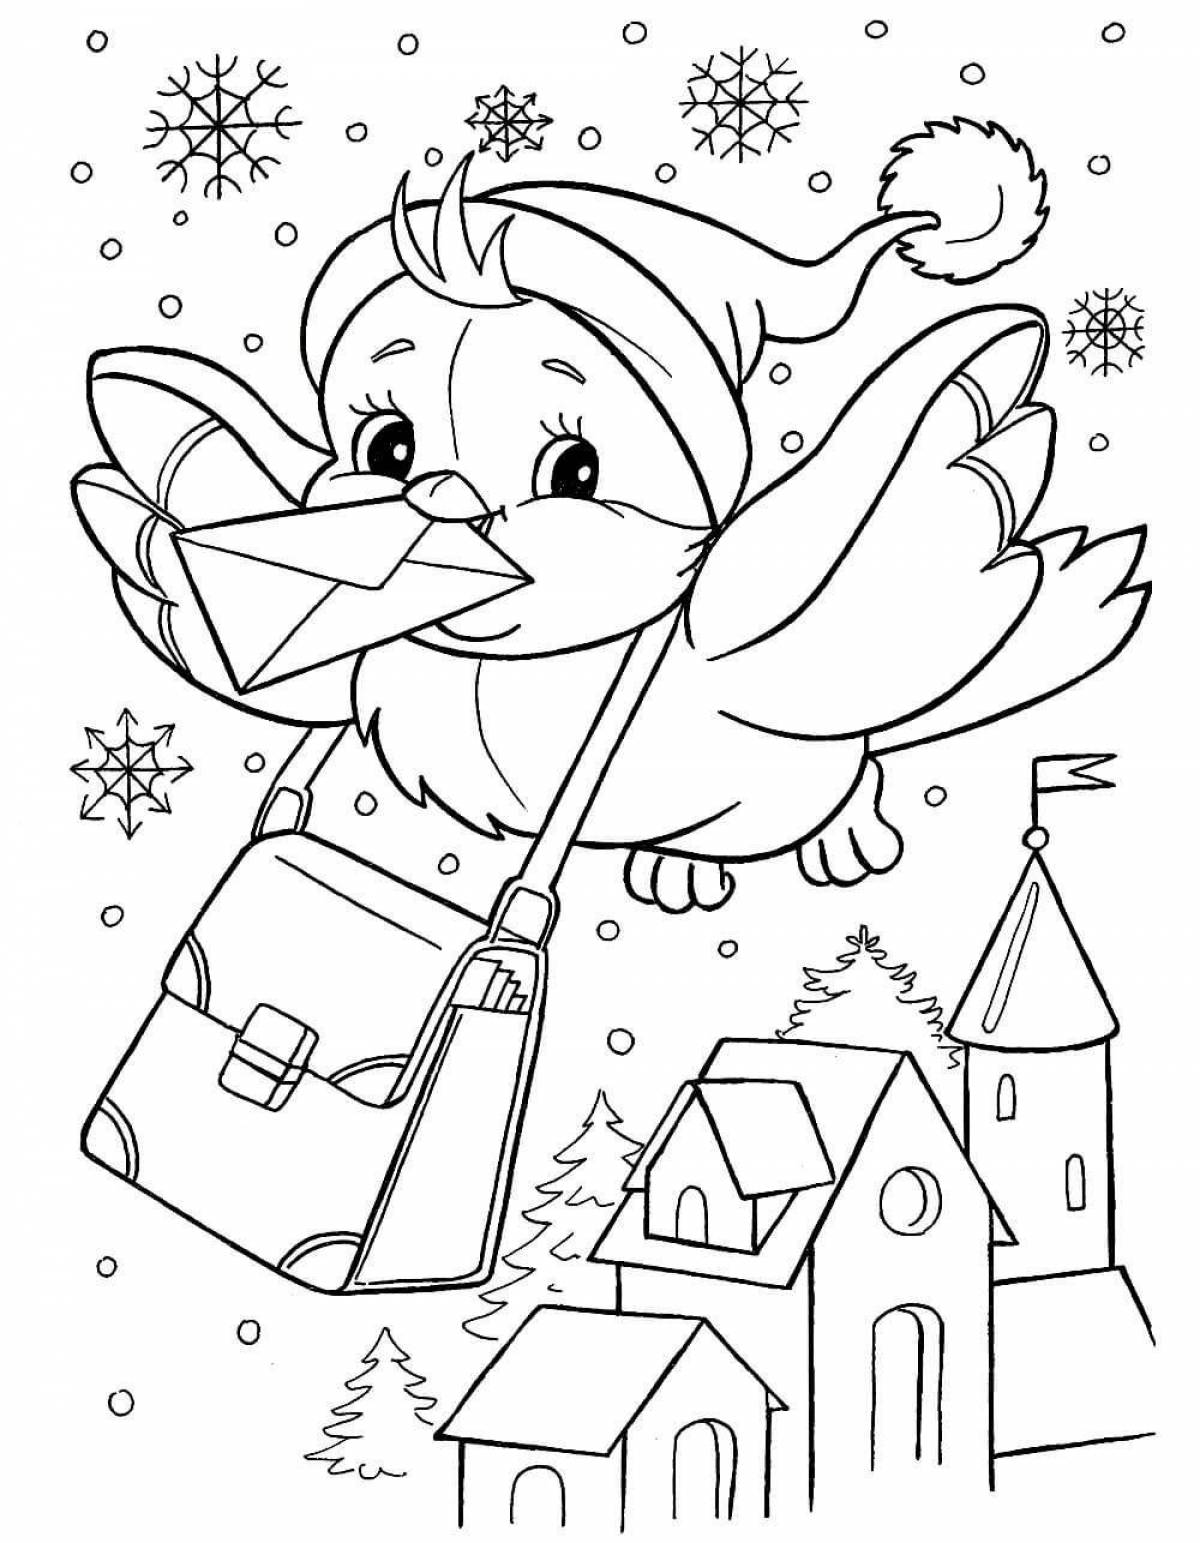 Glamorous winter coloring book for kids 3-4 years old